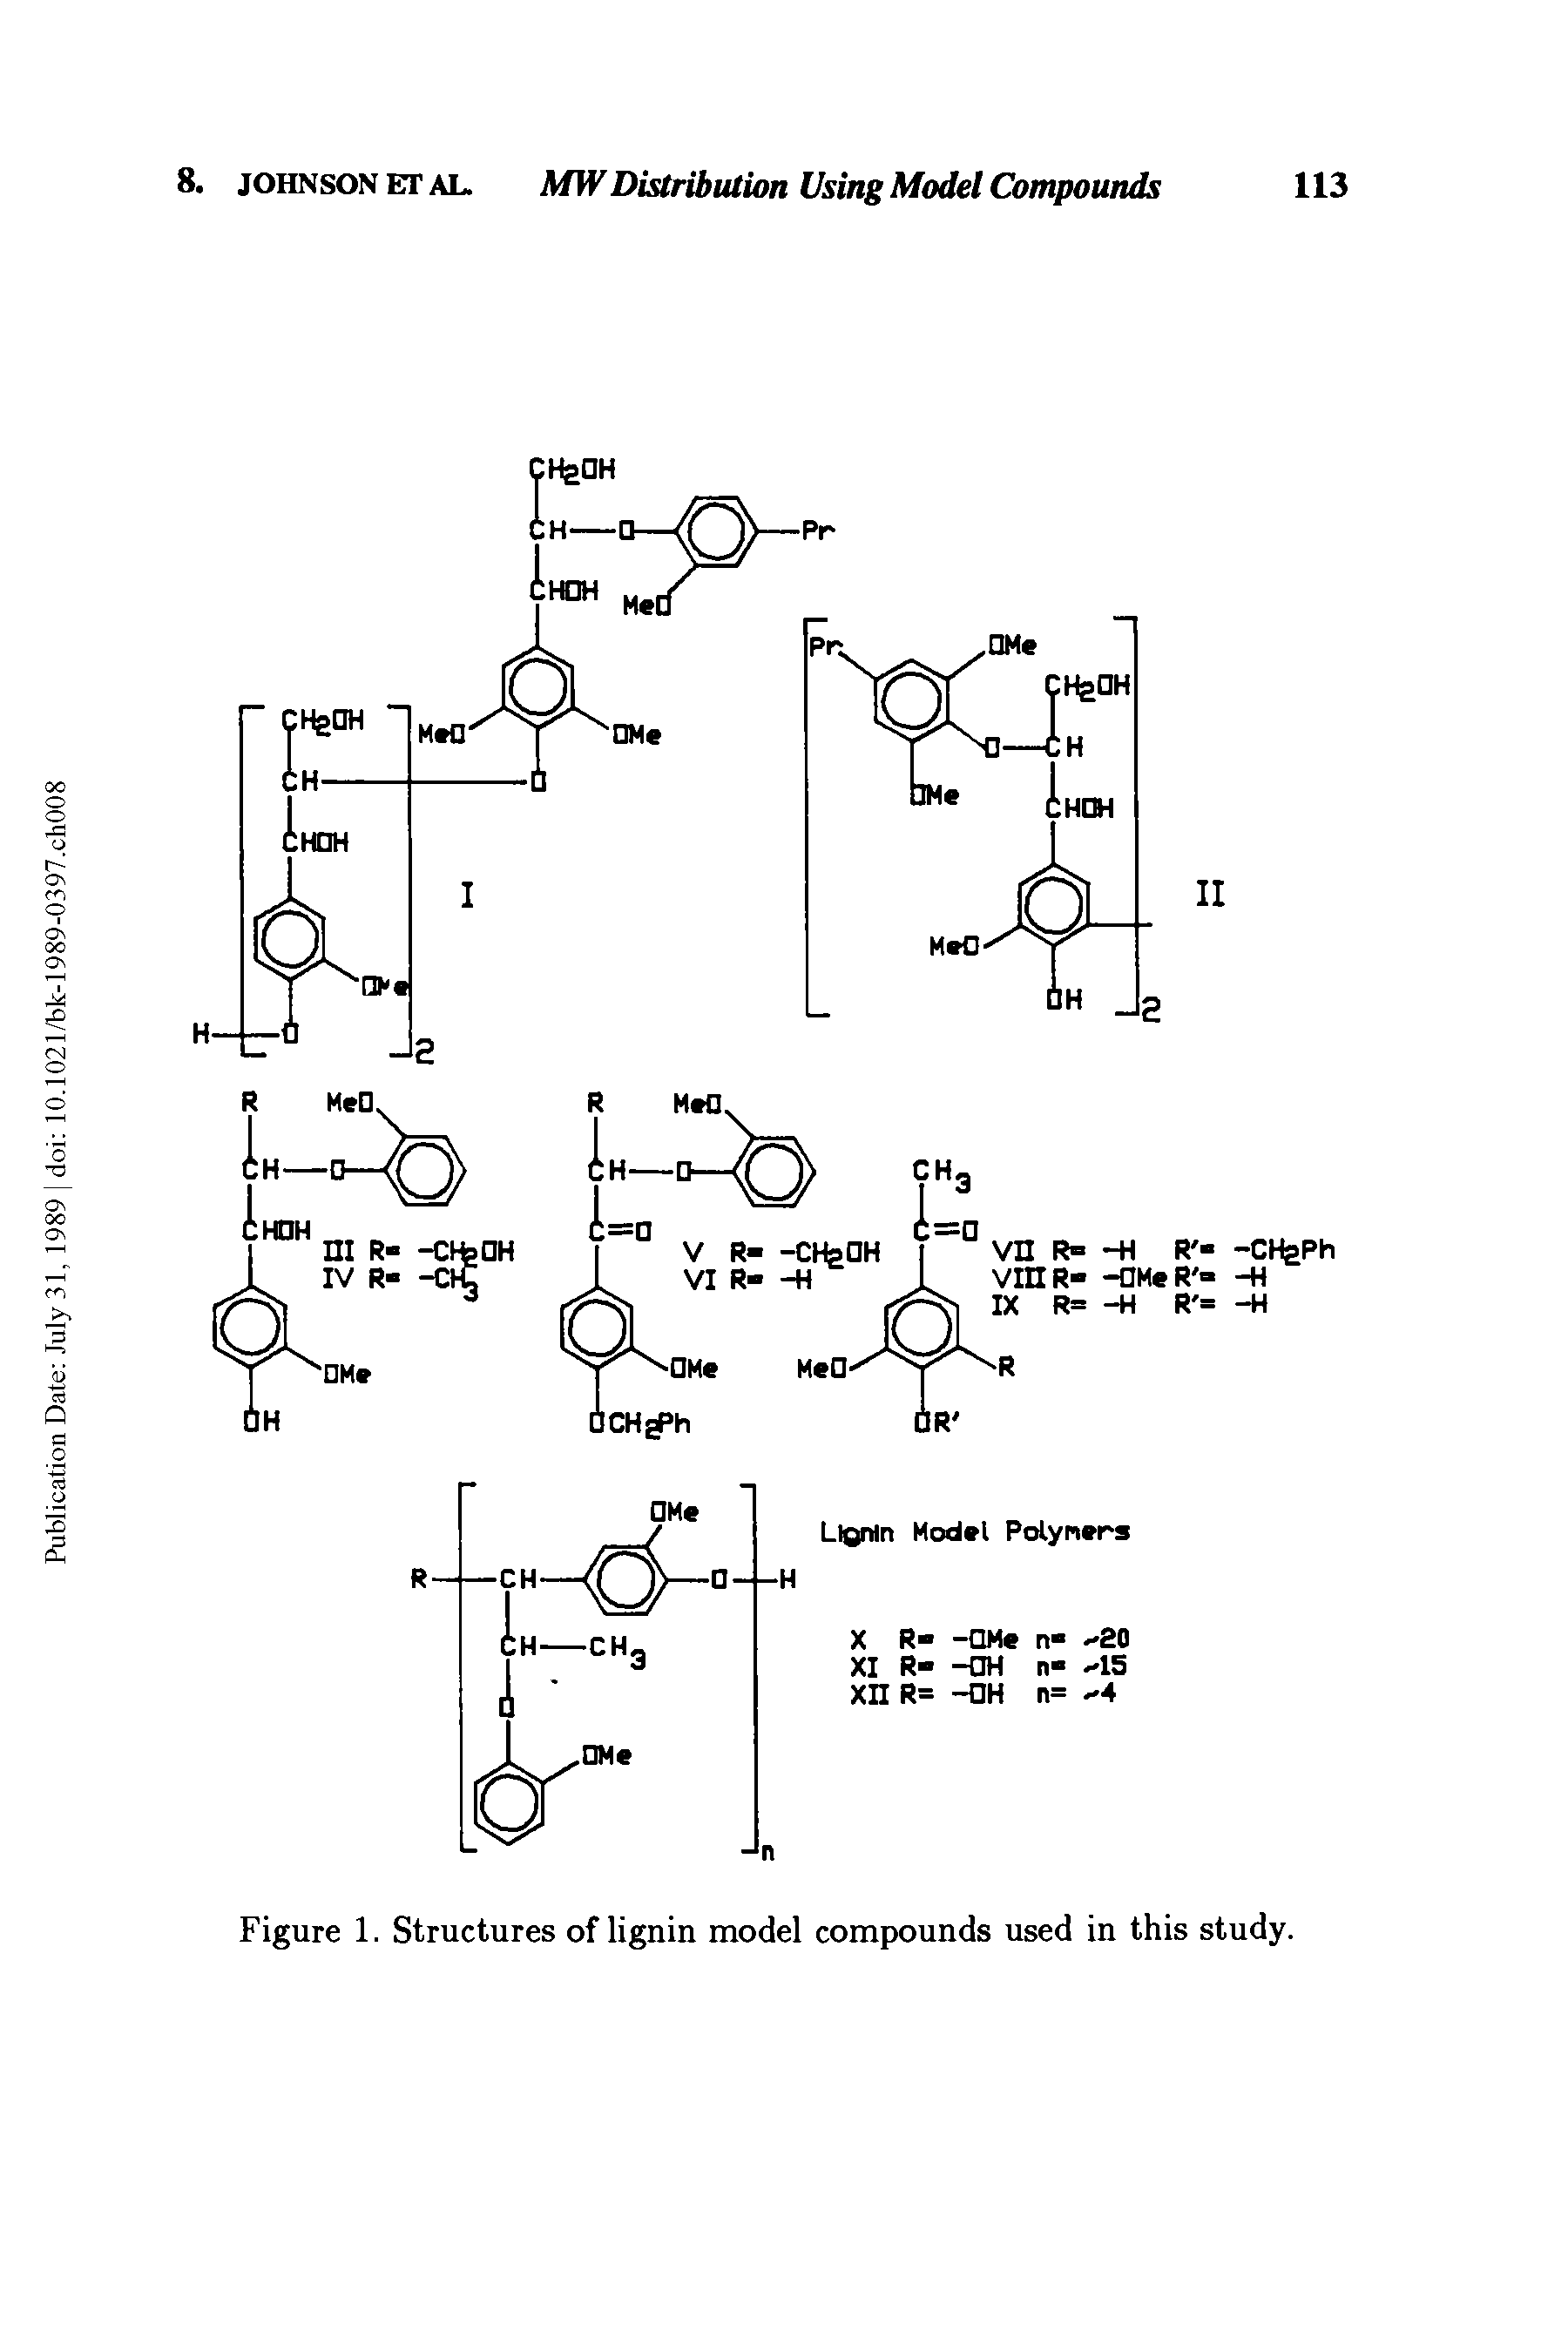 Figure 1. Structures of lignin model compounds used in this study.